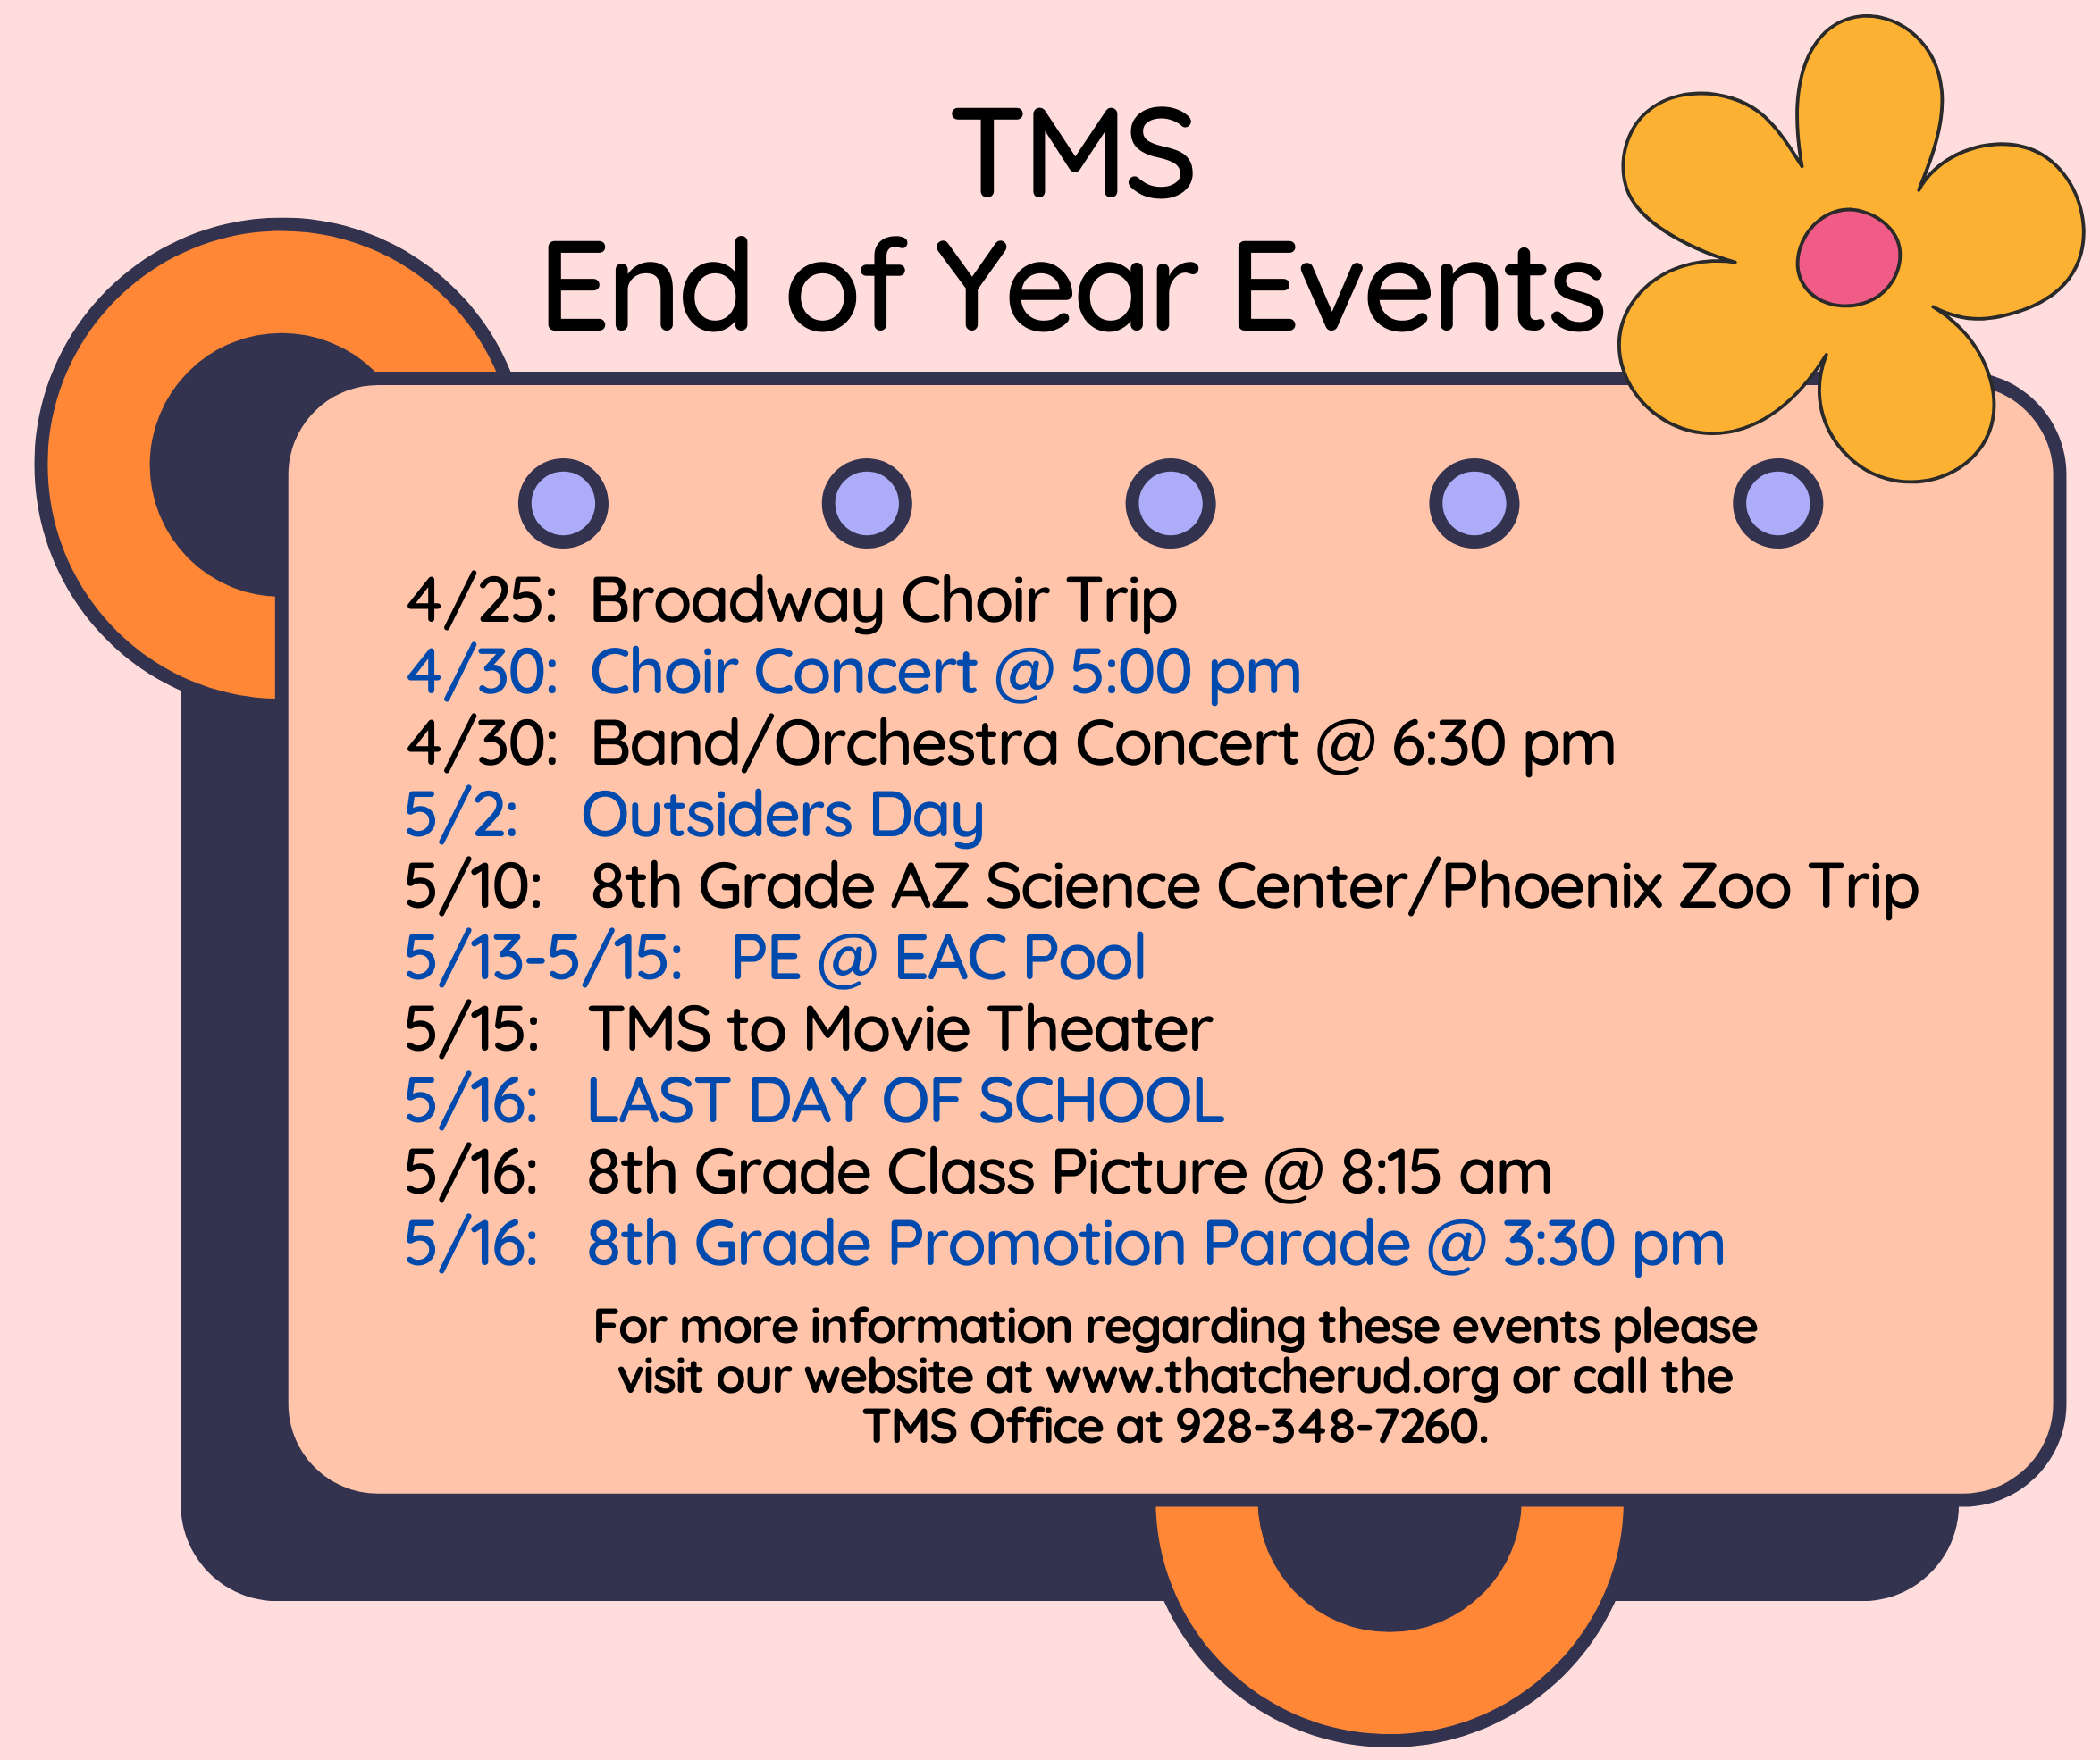 TMS End of Year